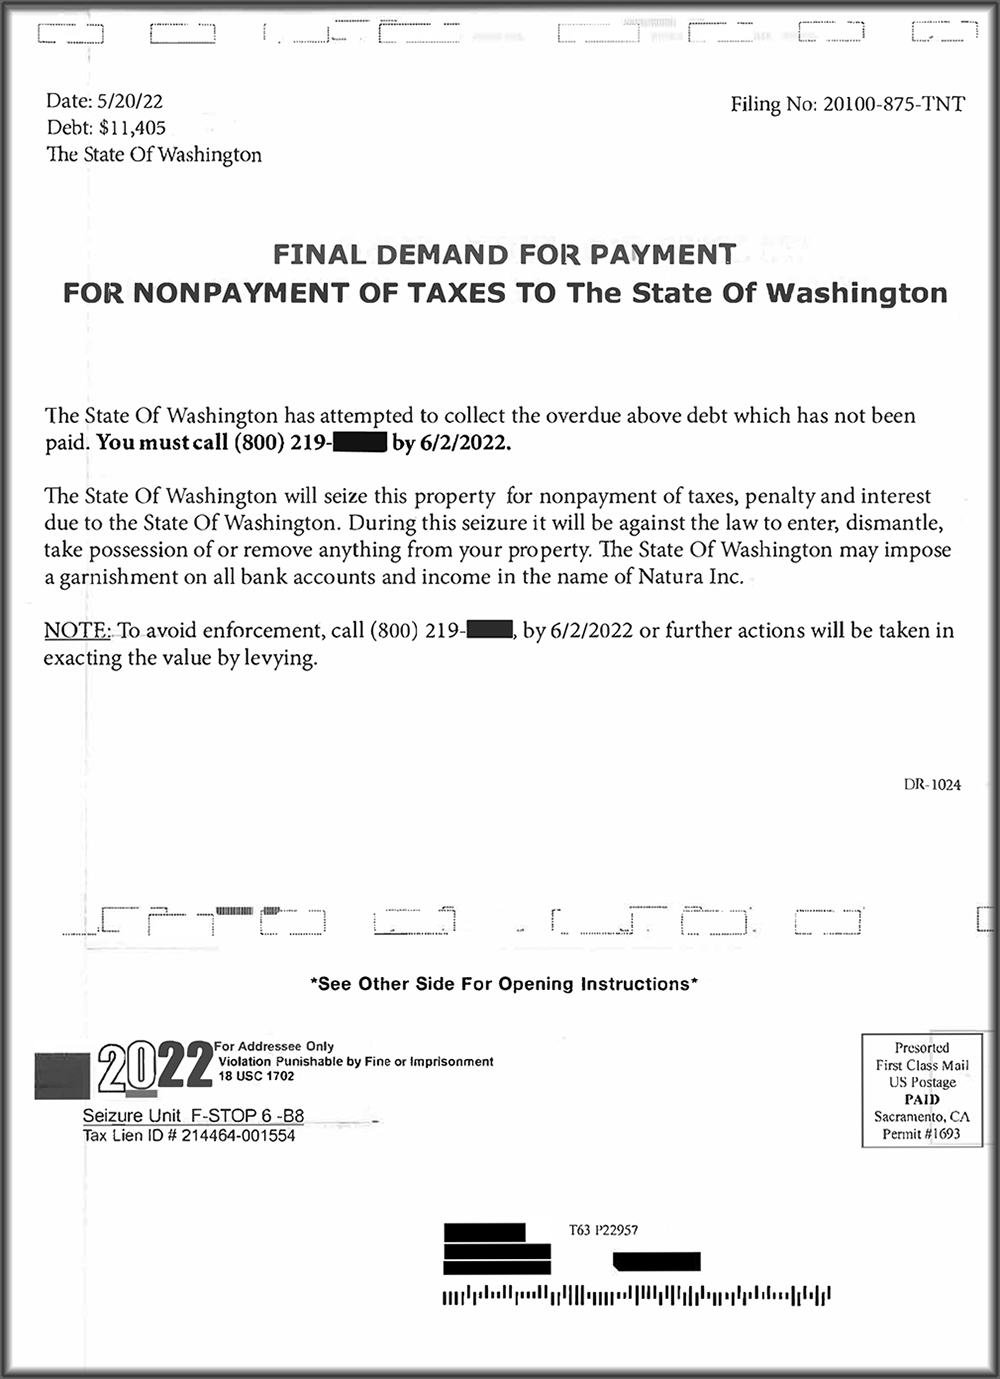 Sample scam letter with title "FINAL DEMAND FOR PAYMENT FOR NONPAYMENT OF TAXES TO The State Of Washington"